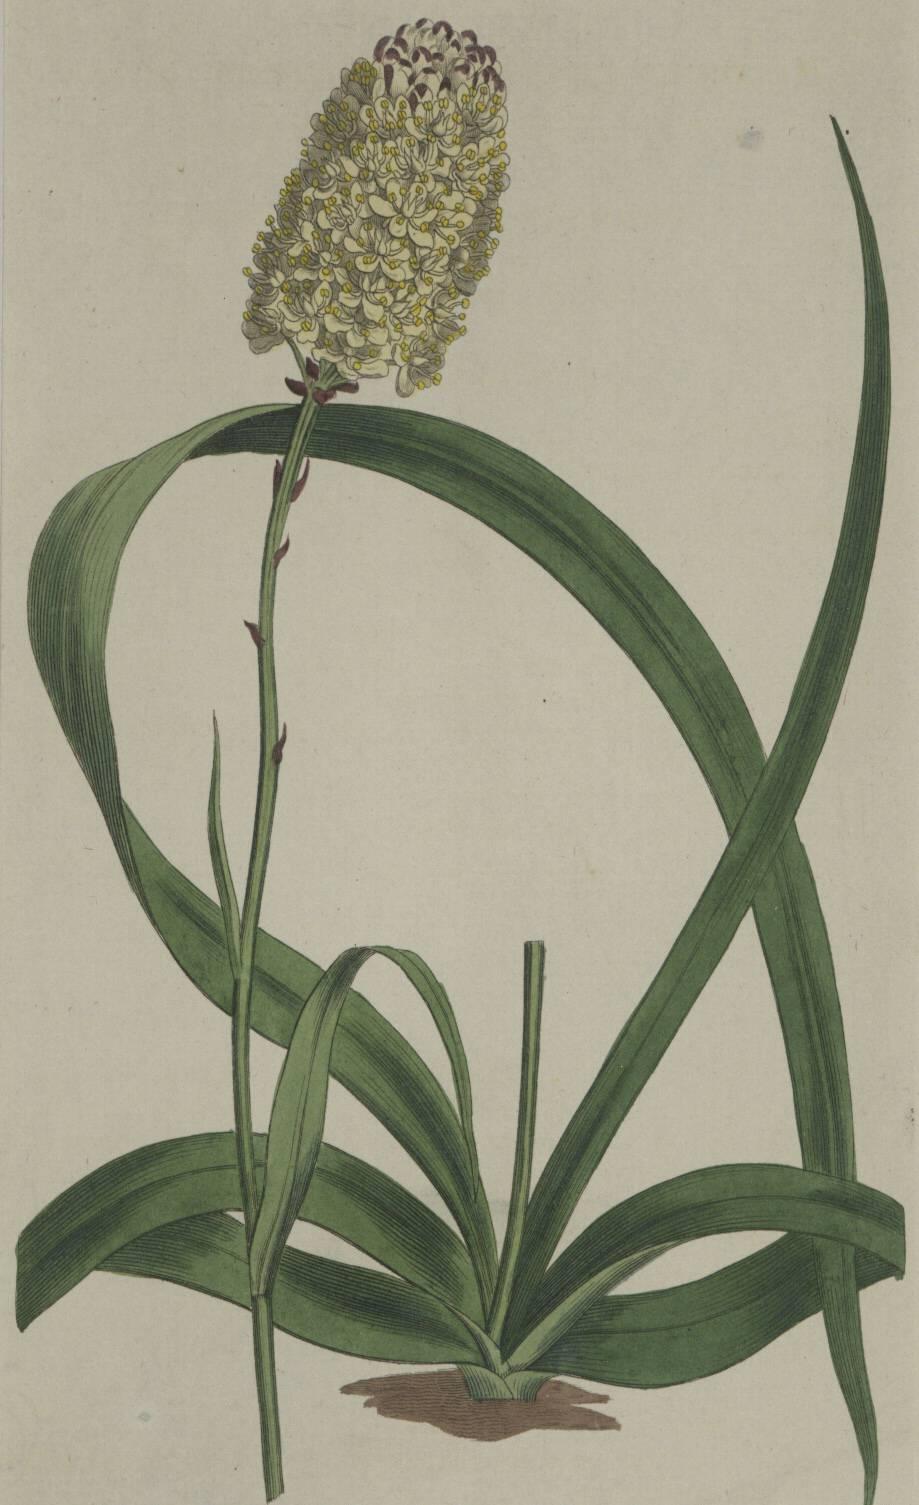 Purpl and Yellow Curtis Flowers - Print by Sydenham Edwards